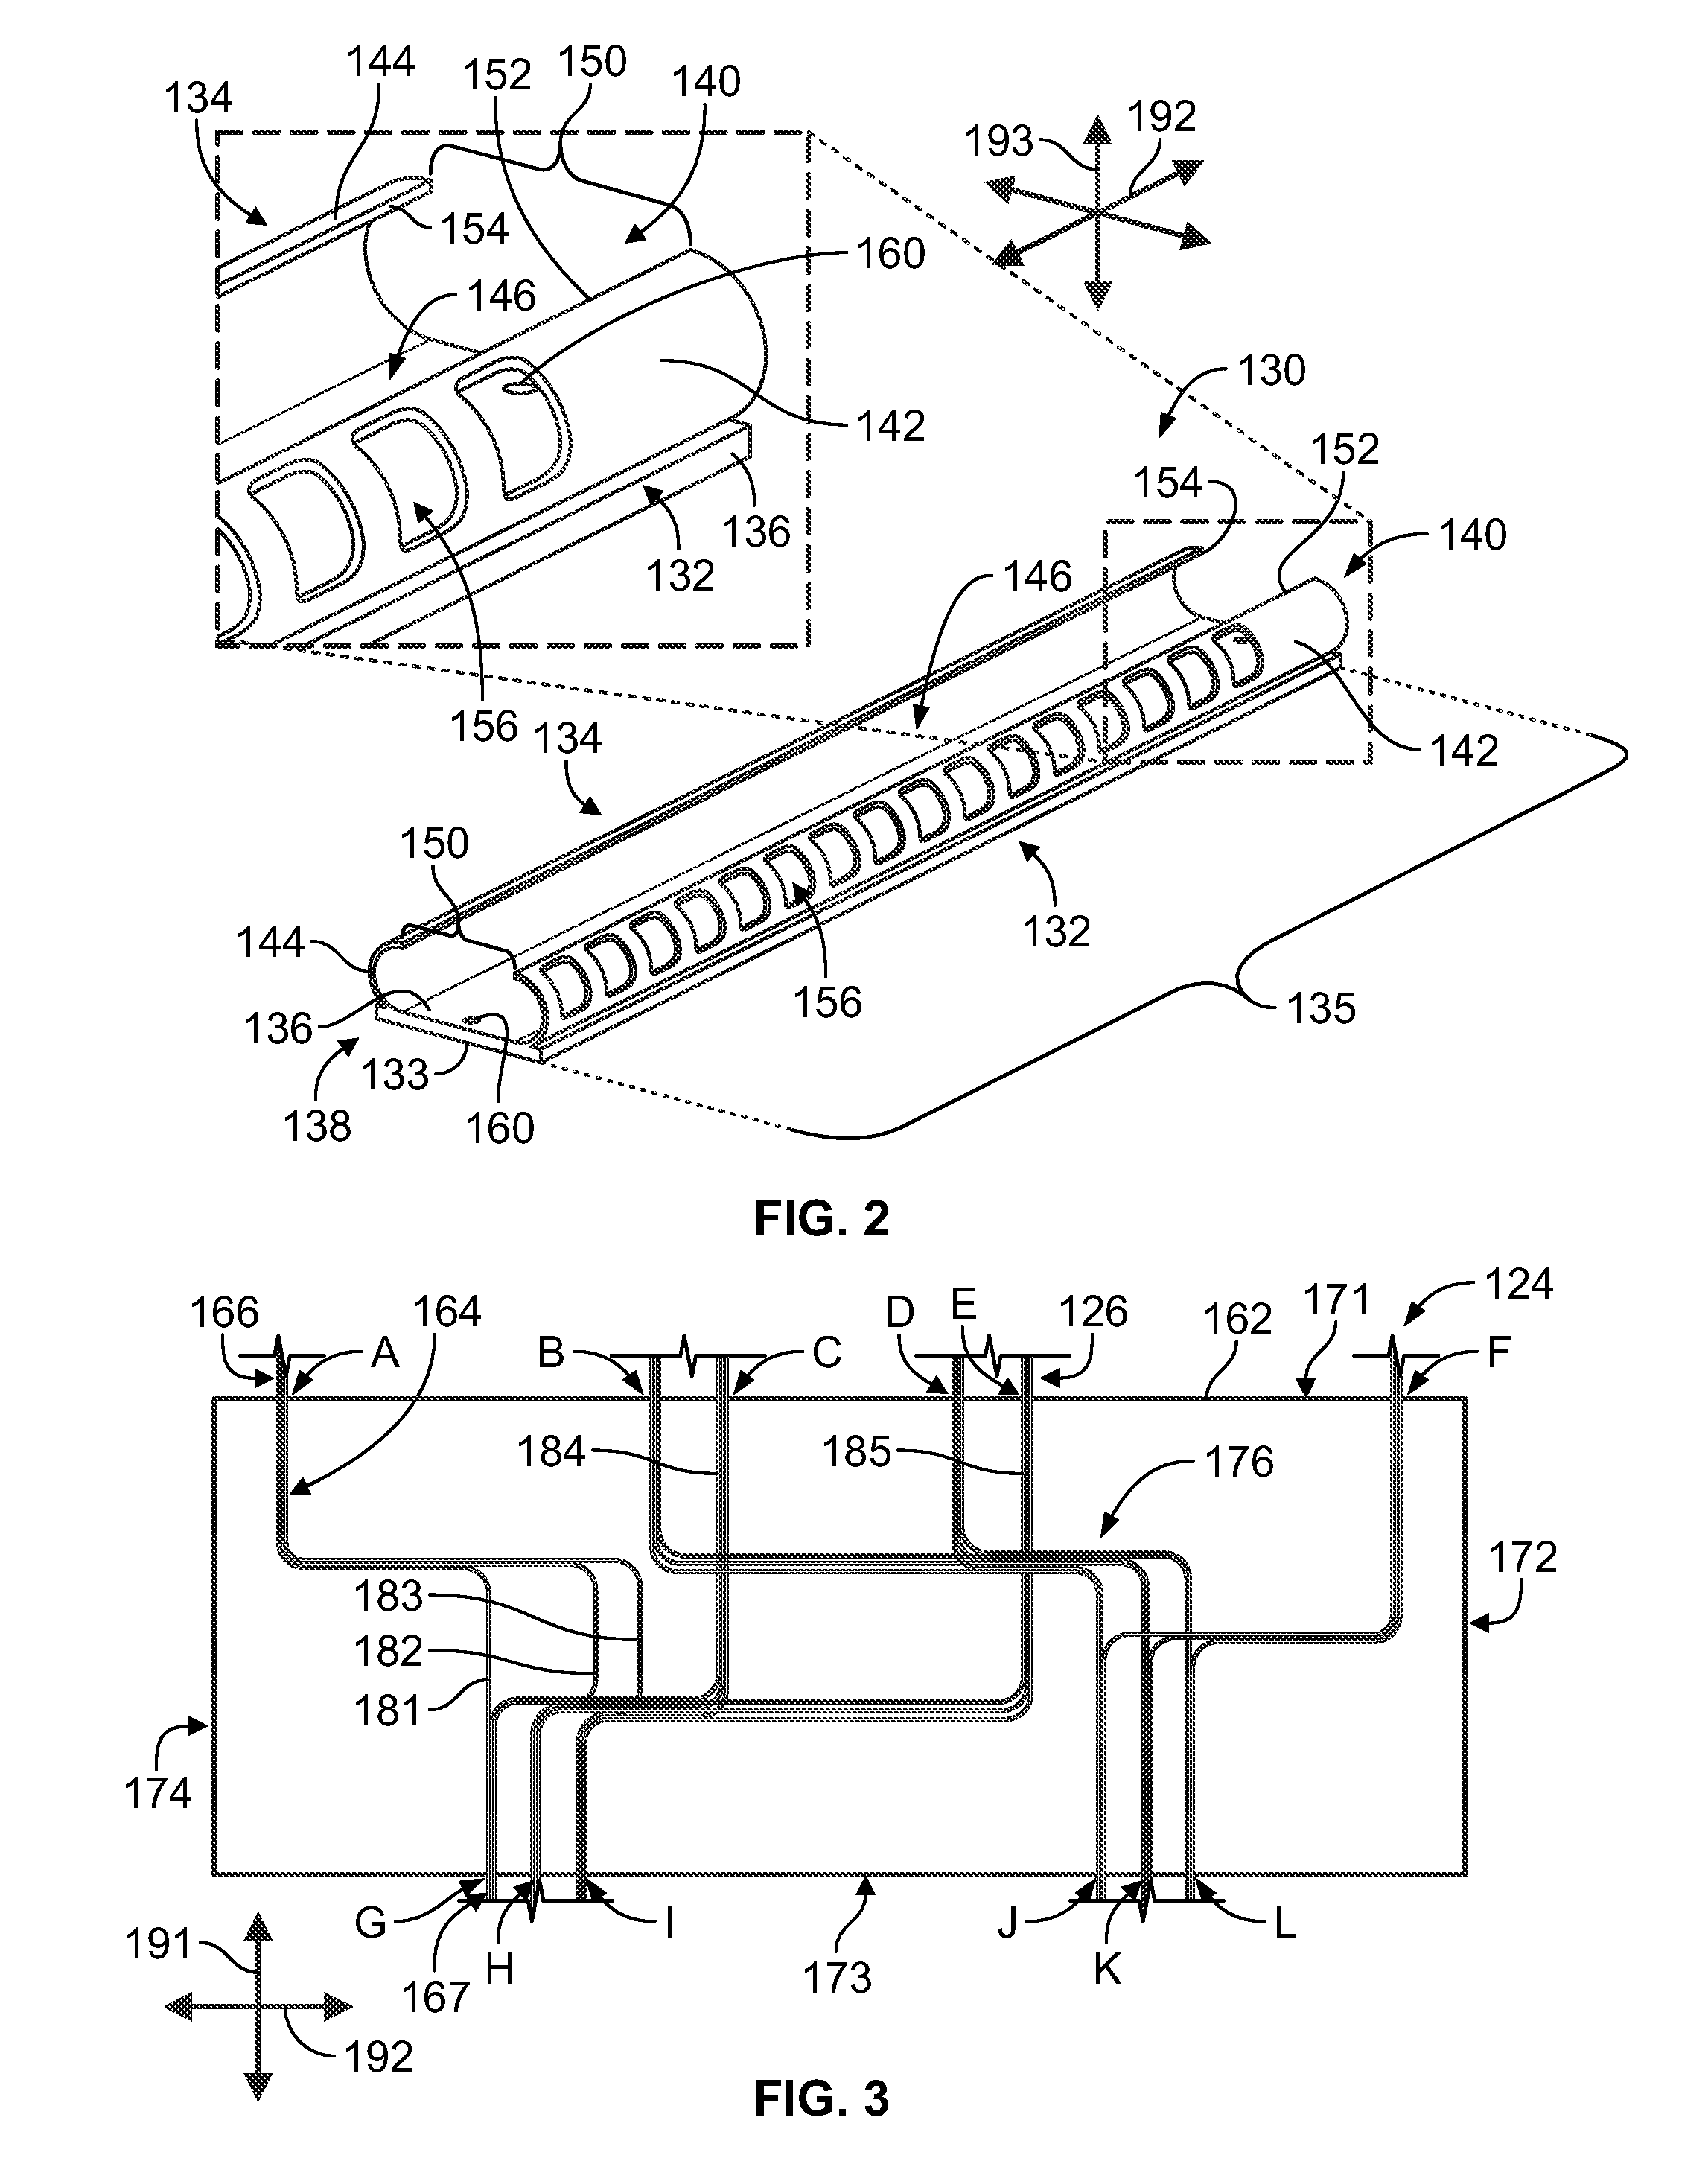 Organizer tray, fiber-routing assembly, and electro-optical module